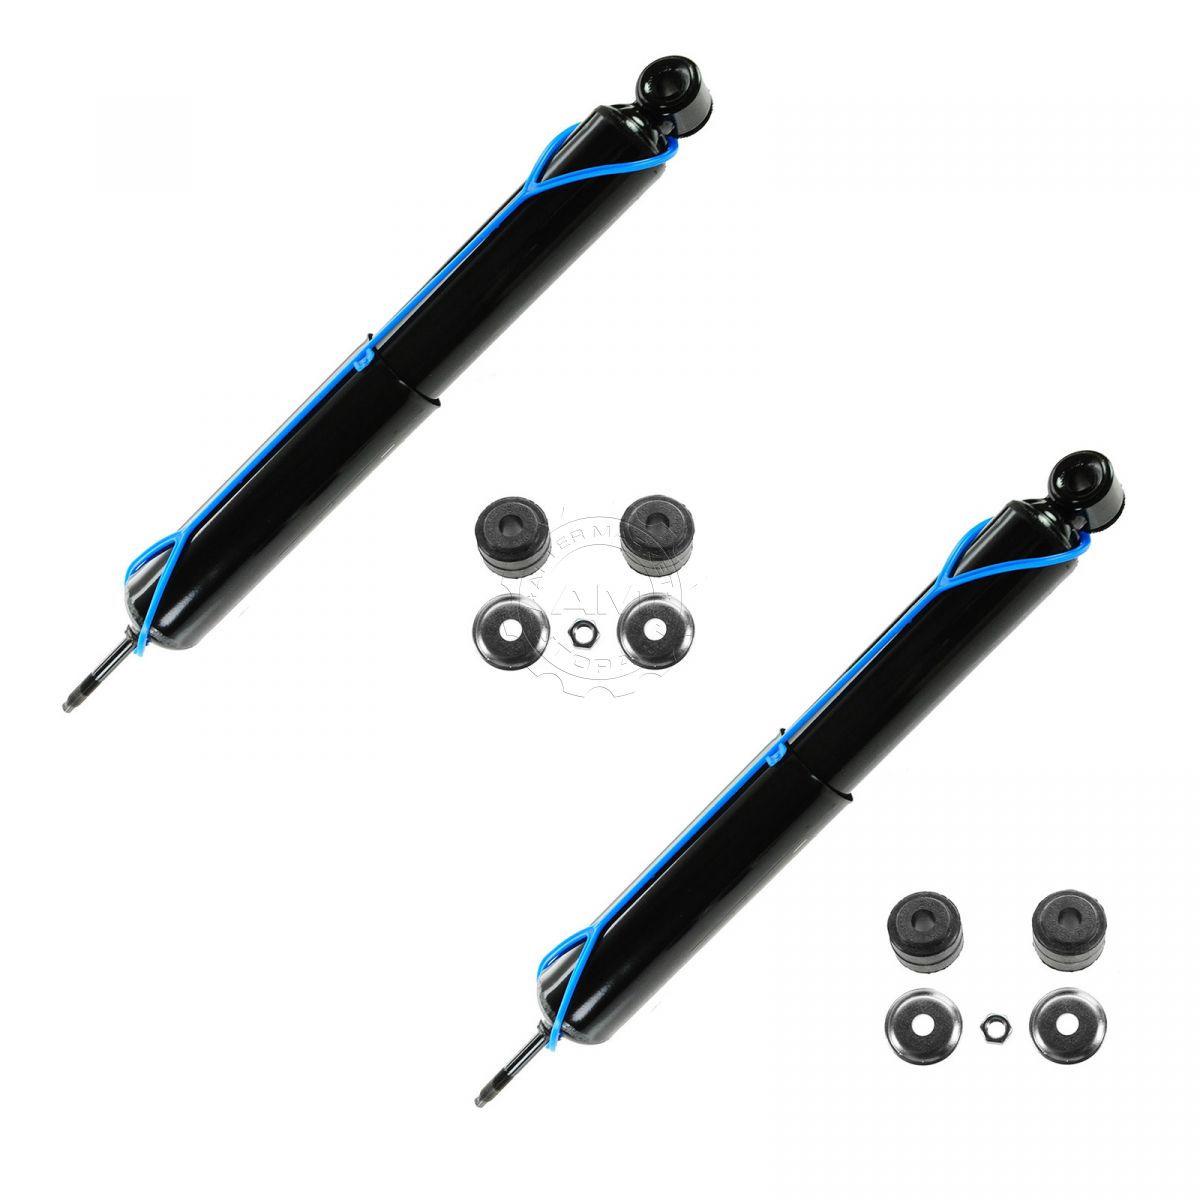 Monroe Shock Absorber Rear Pair Set for 00-06 Toyota Tundra 4WD | eBay